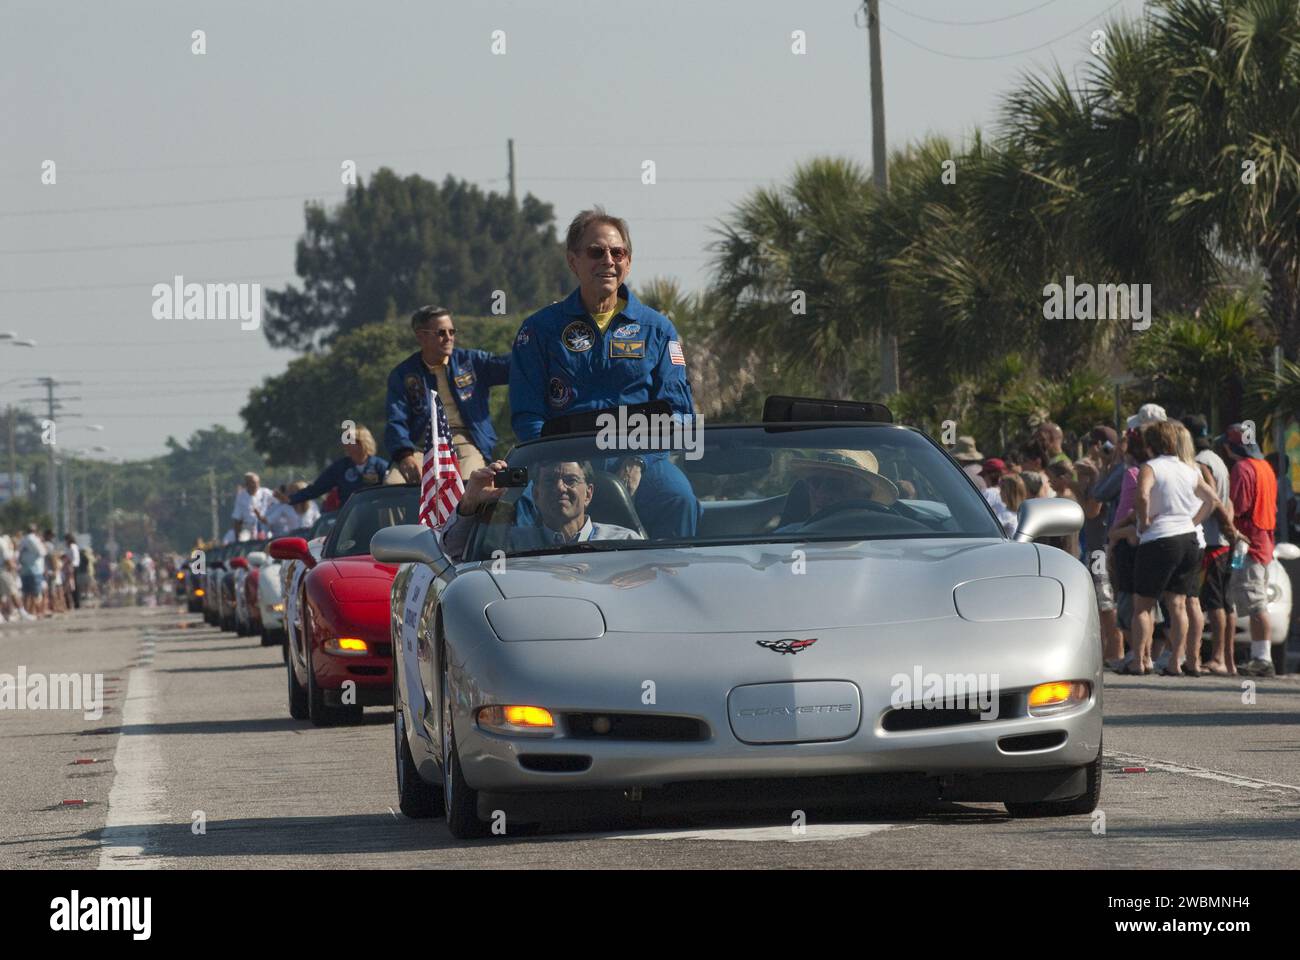 Cape Canaveral, Fla. -- Retired space shuttle astronaut Sam Durrance greets spectators from a Chevrolet Corvette during a commemorative parade in Cocoa Beach, Fla.      A group of current and retired NASA astronauts gathered in Cocoa Beach to commemorate NASA’s 50 years of accomplishments and to honor astronaut Alan Shepard’s Mercury/Freedom 7 suborbital flight May 5, 1961.The event was marked by a parade, with the astronauts riding in a fleet of Chevrolet Corvettes that corresponded with the time period of their space missions. Members of the Cape Kennedy Corvette Club, a group established in Stock Photo